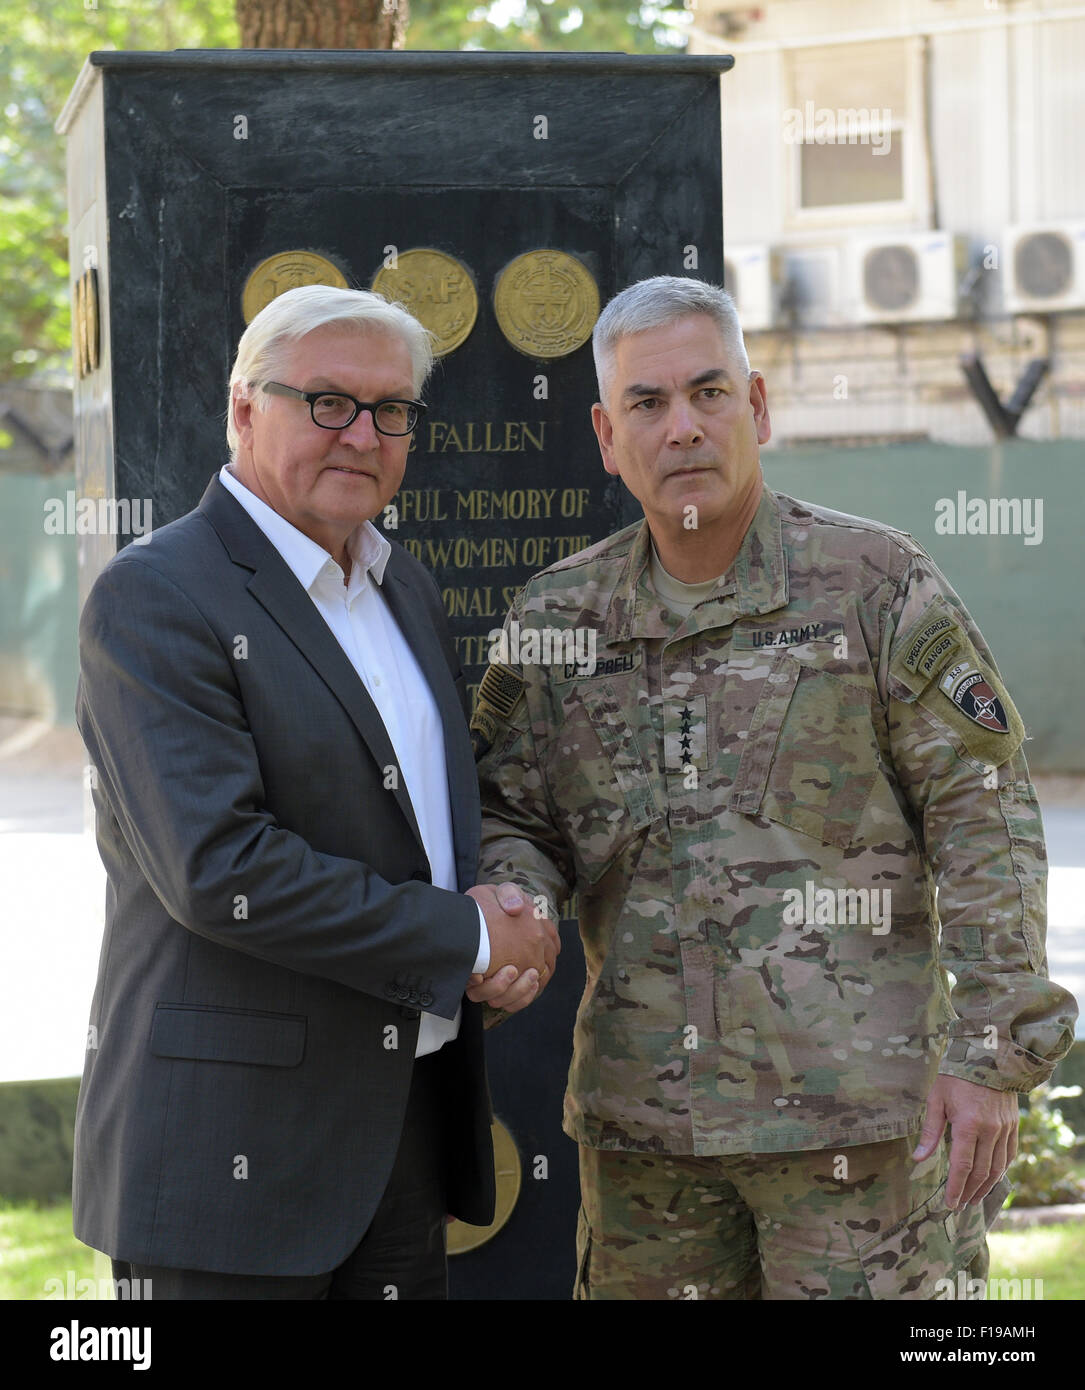 Kabul, Afghanistan. 30th Aug, 2015. German Foreign Minister Frank-Walter Steinmeier (L, SPD) shakes hands with commander of the Resolute Support Mission, General John F. Campbell, in the NATO compond in Kabul, Afghanistan, 30 August 2015. Steinmeier is on a two-day visit to the region. PHOTO: RAINER JENSEN/DPA/Alamy Live News Stock Photo